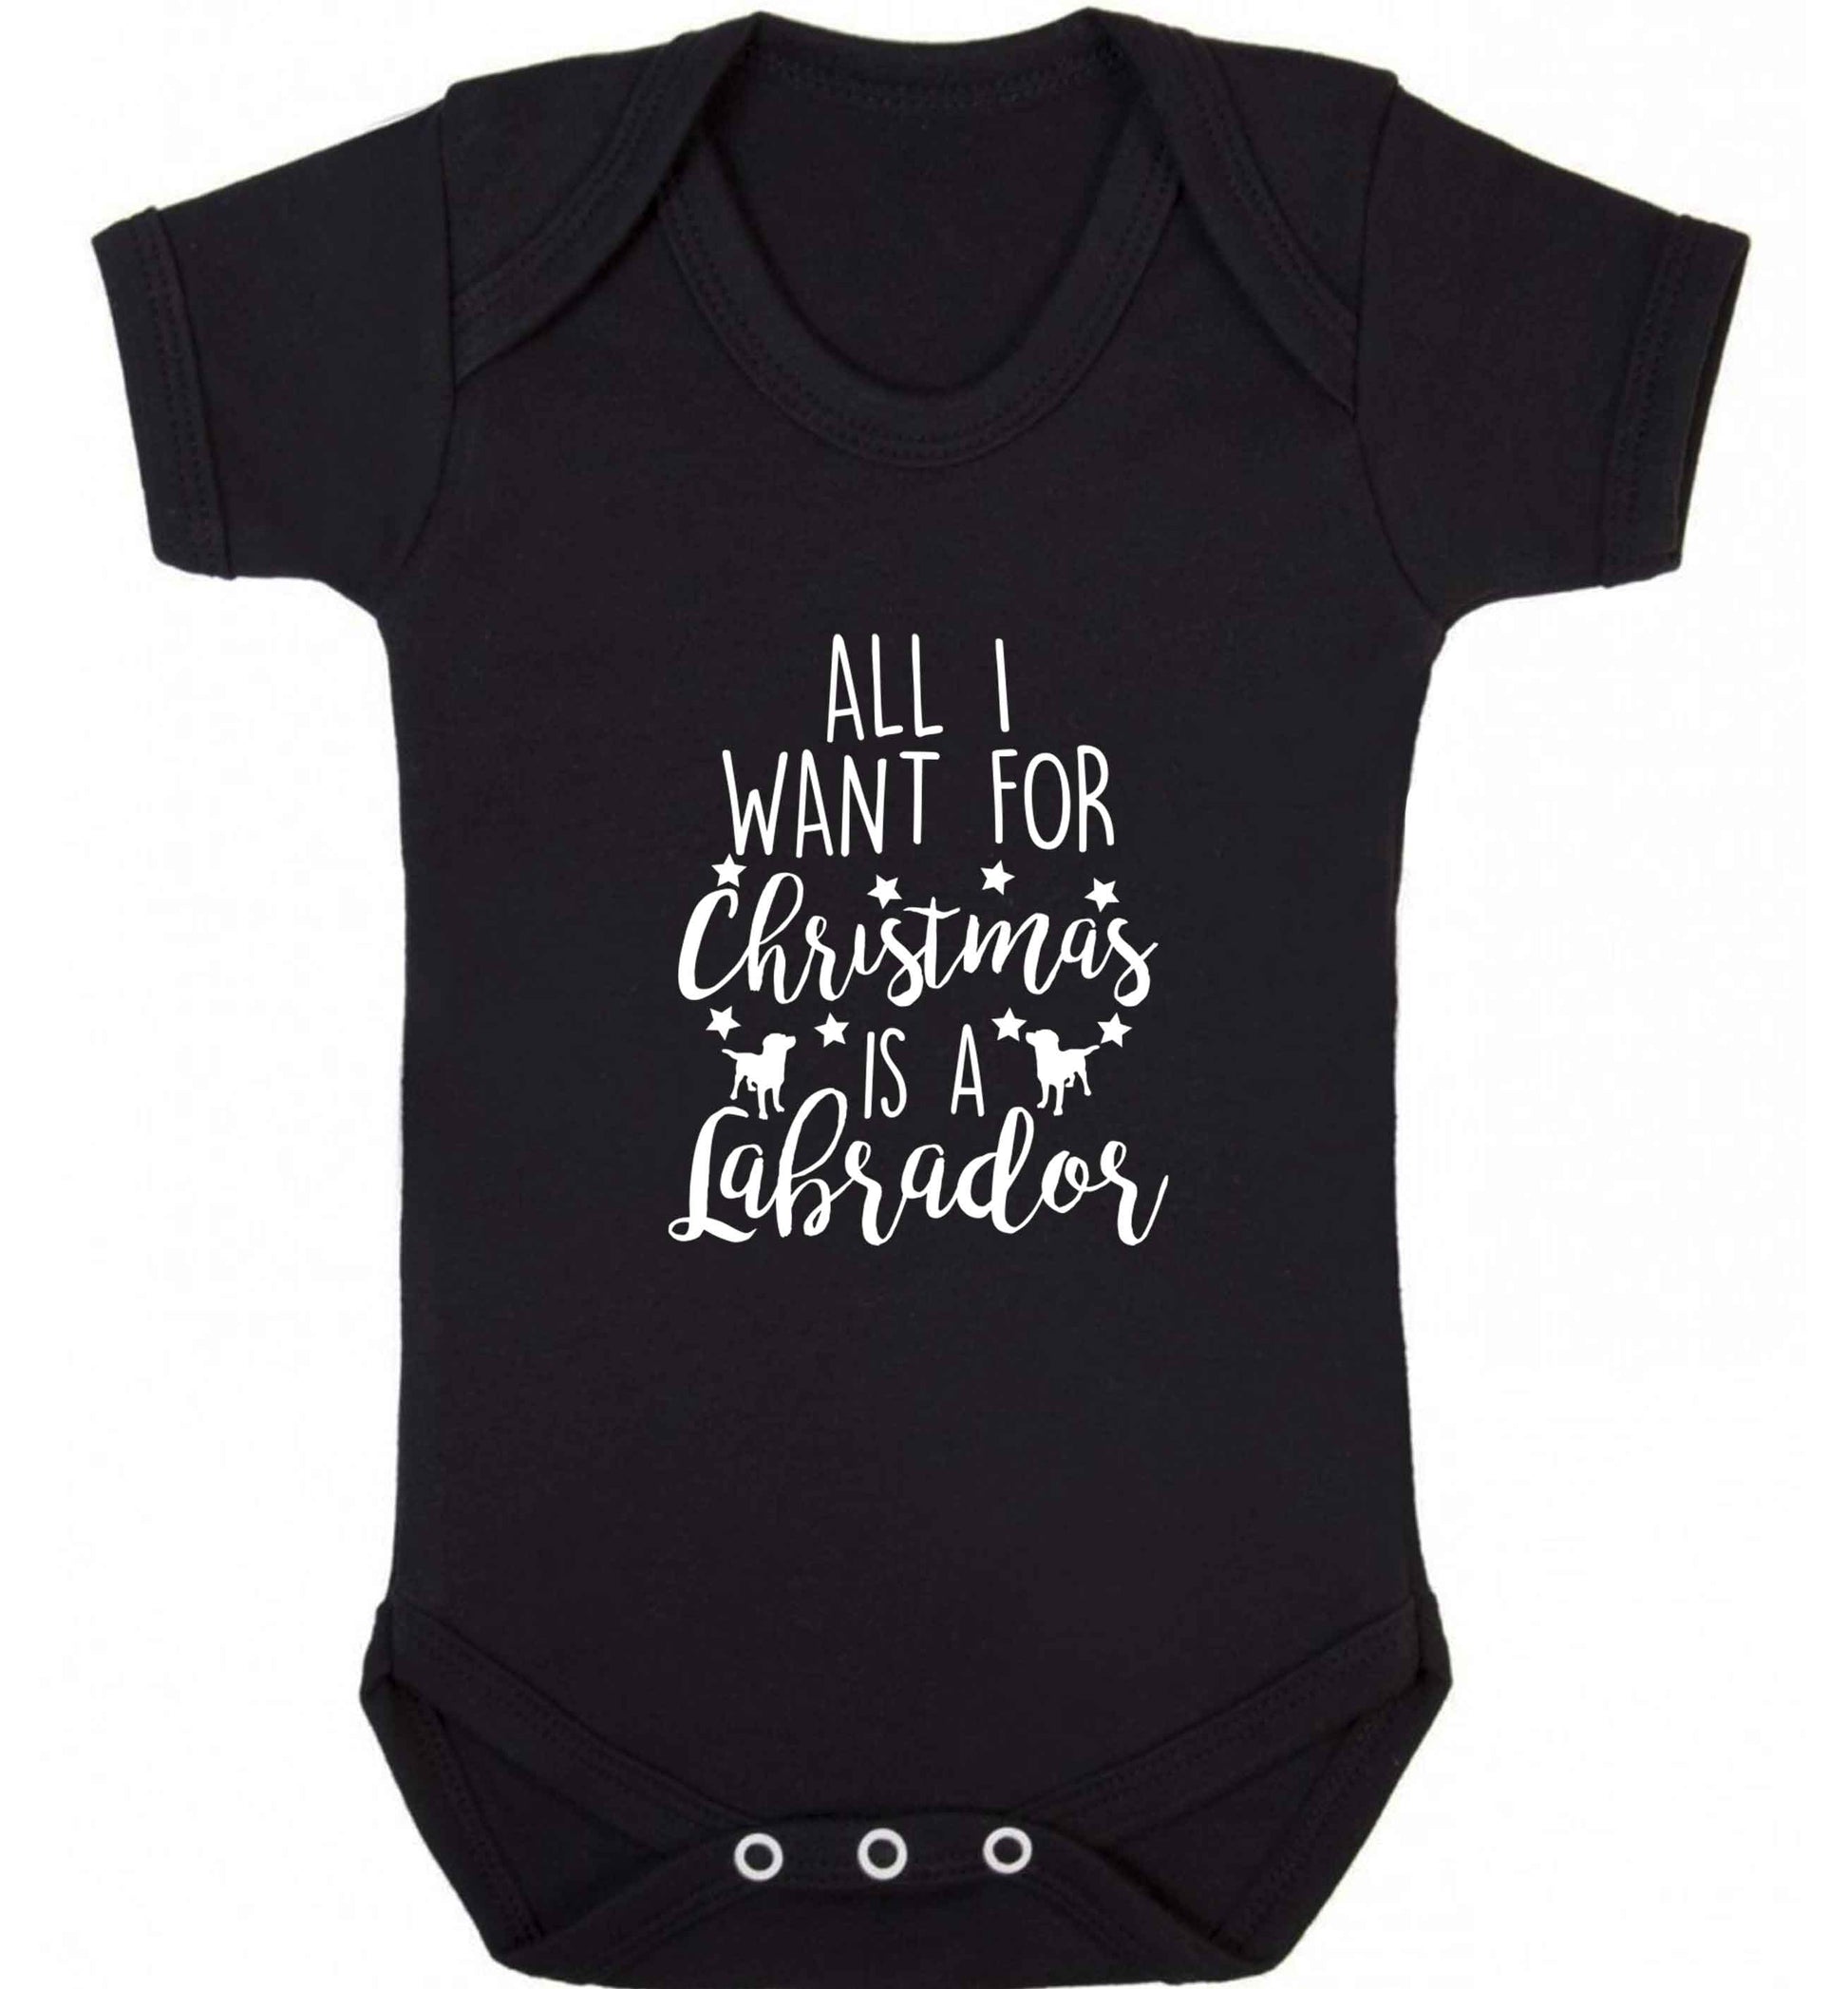 All I want for Christmas is a labrador baby vest black 18-24 months